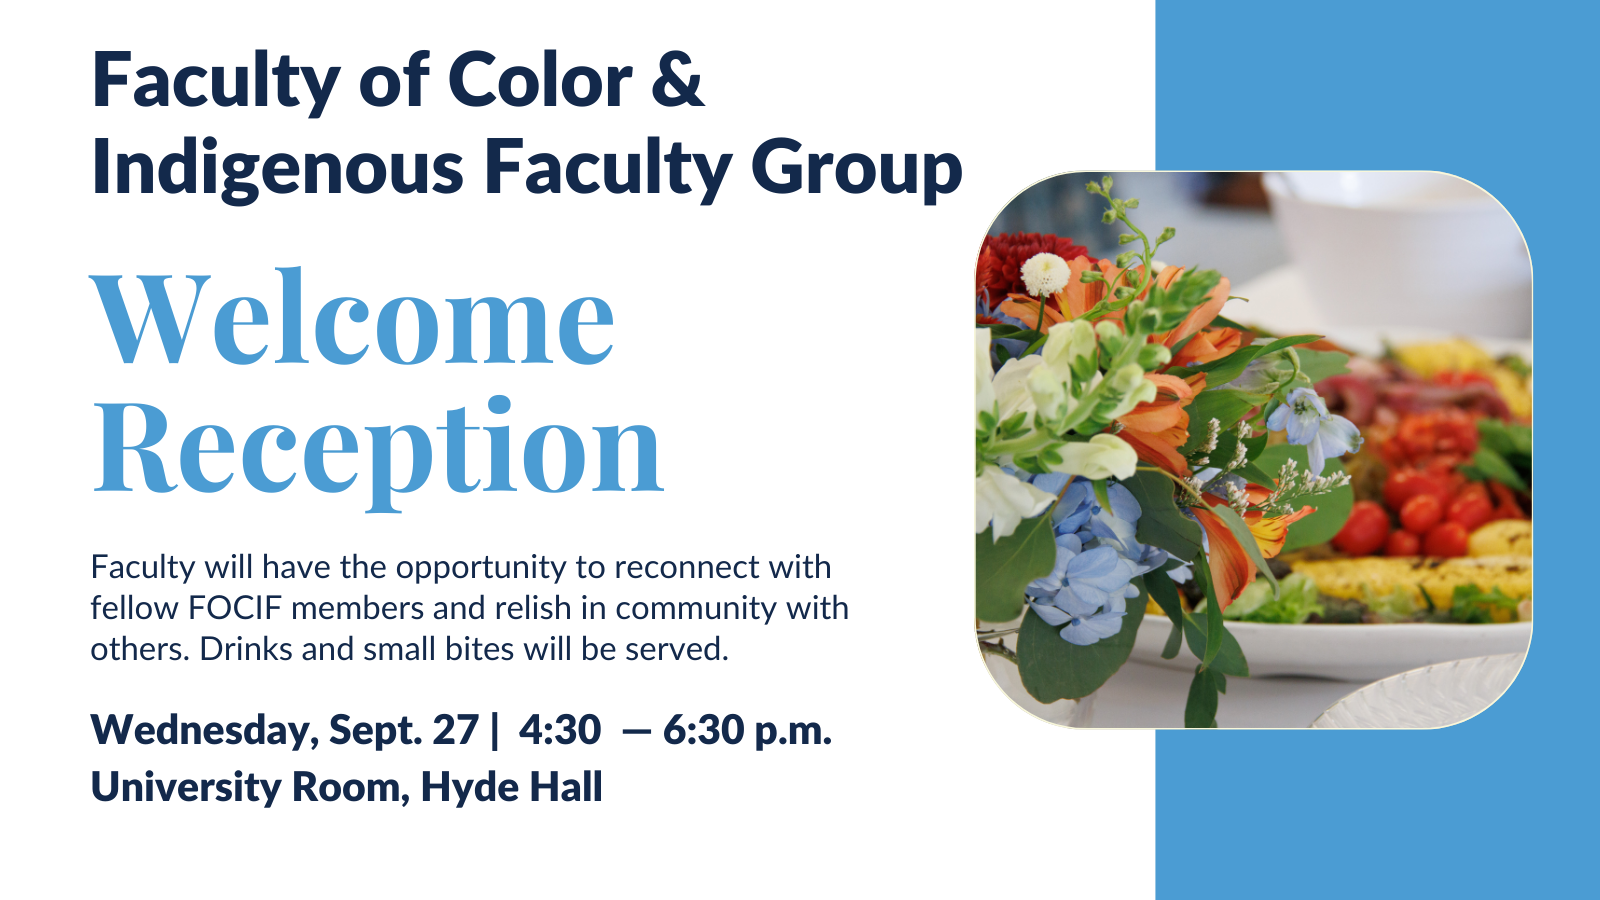 Faculty of Color and Indigenous Faculty Group Welcome Reception. Faculty will have the opportunity to reconnect with fellow FOCIF members and relish in community with others. Drinks and small bites will be served. Wednesday, Sept 27 4:30-6:30pm. University Room, Hyde Hall